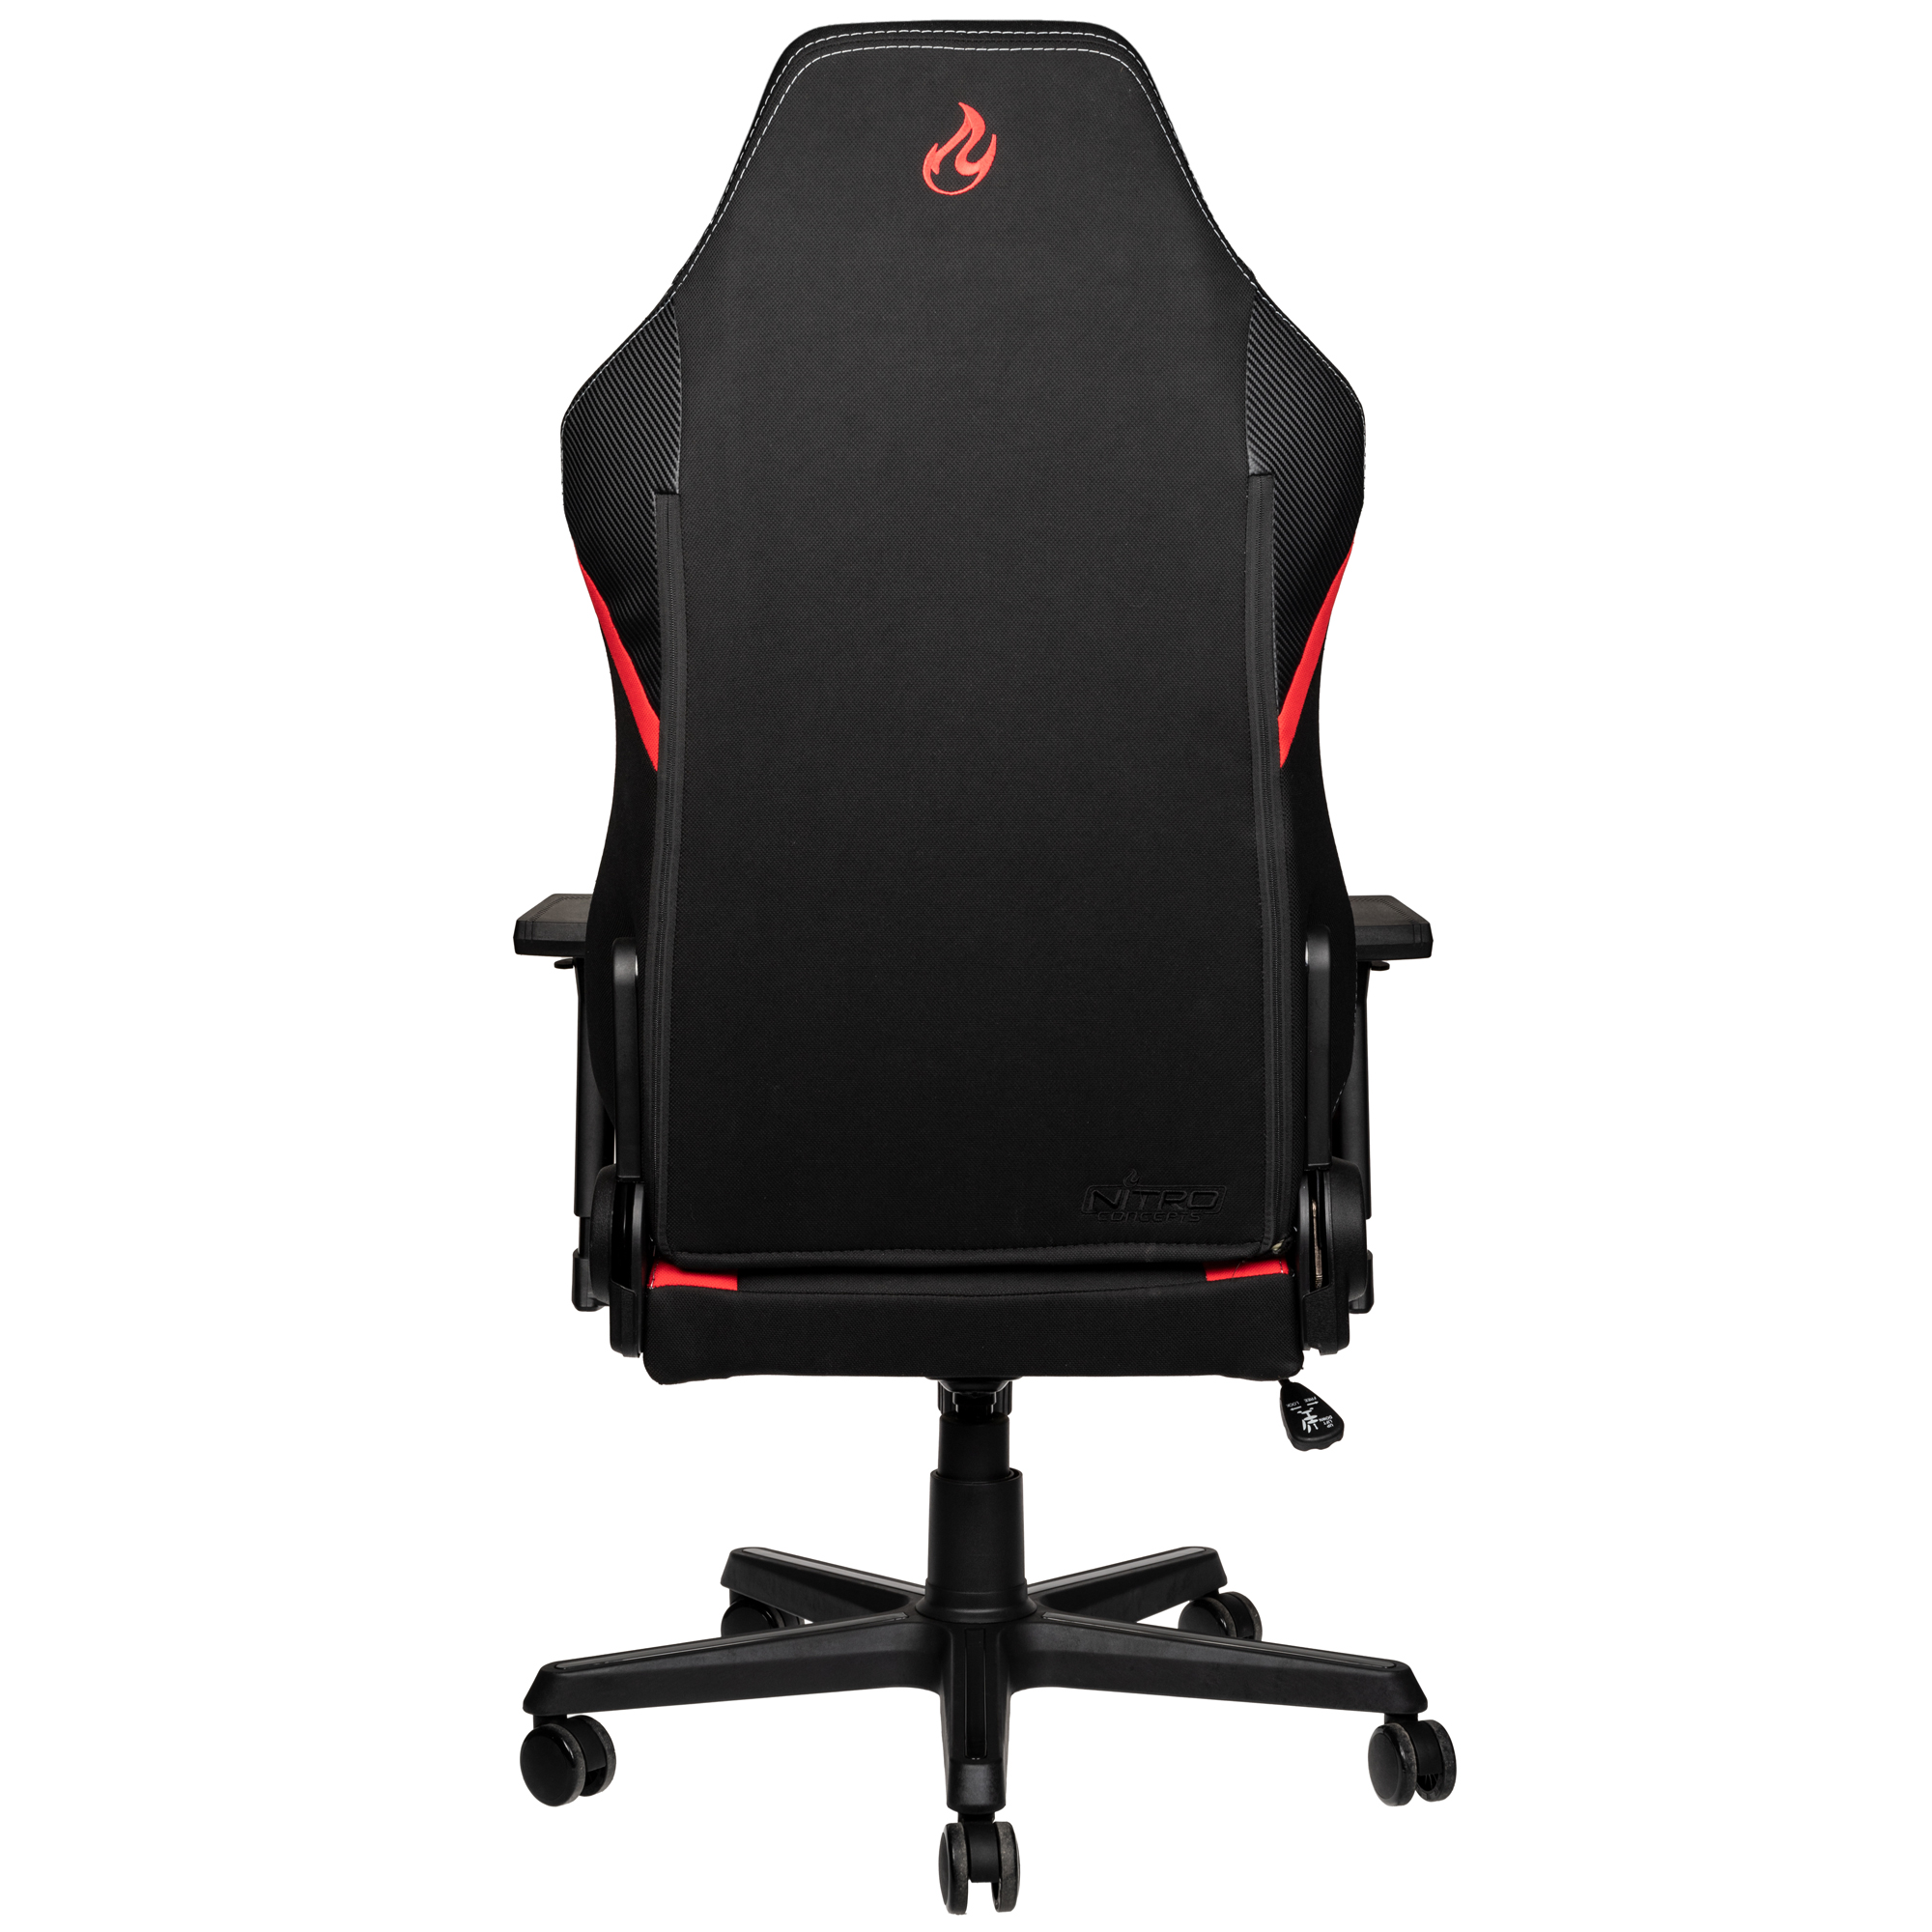 Nitro Concepts - X1000 Gaming Chair Black/Red